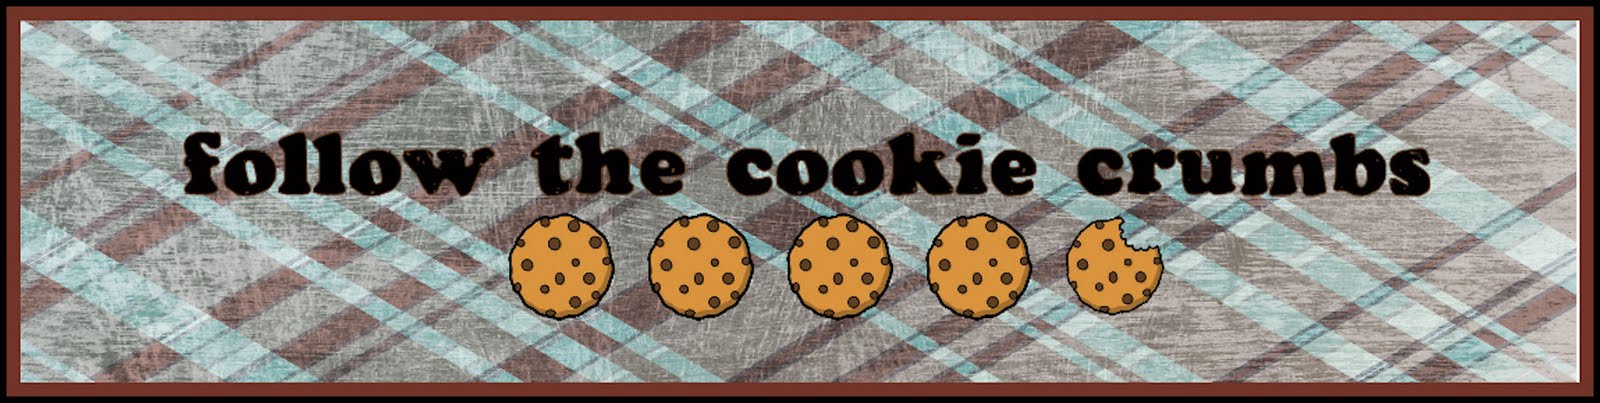 follow the cookie crumbs